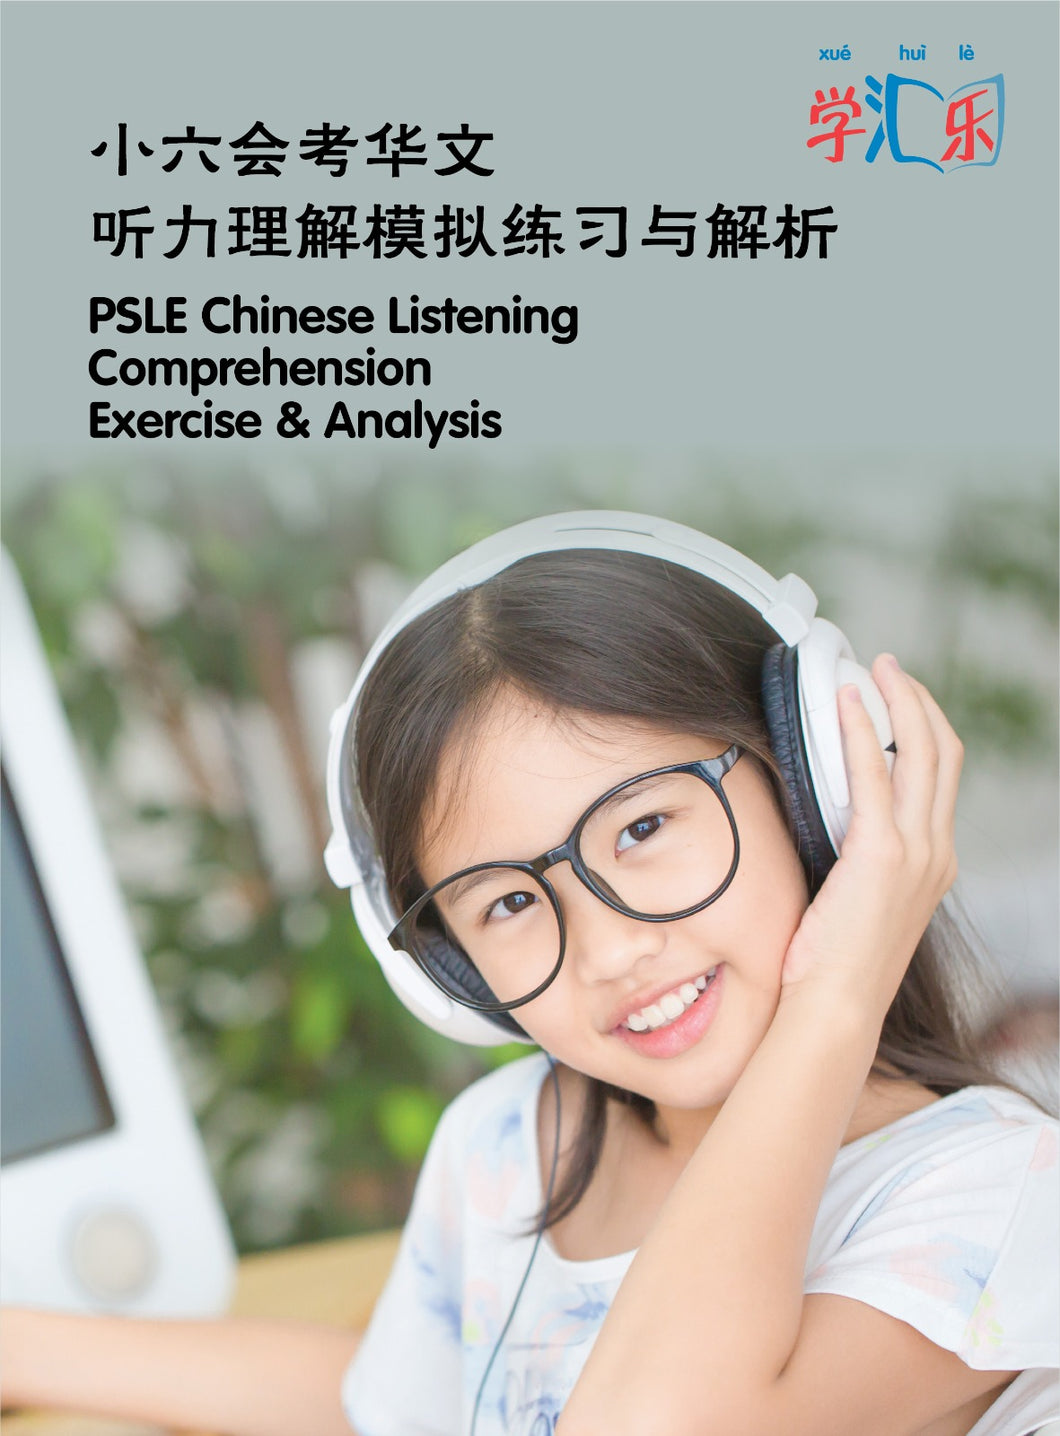 PSLE Chinese Listening Comprehension Exercise and Analysis